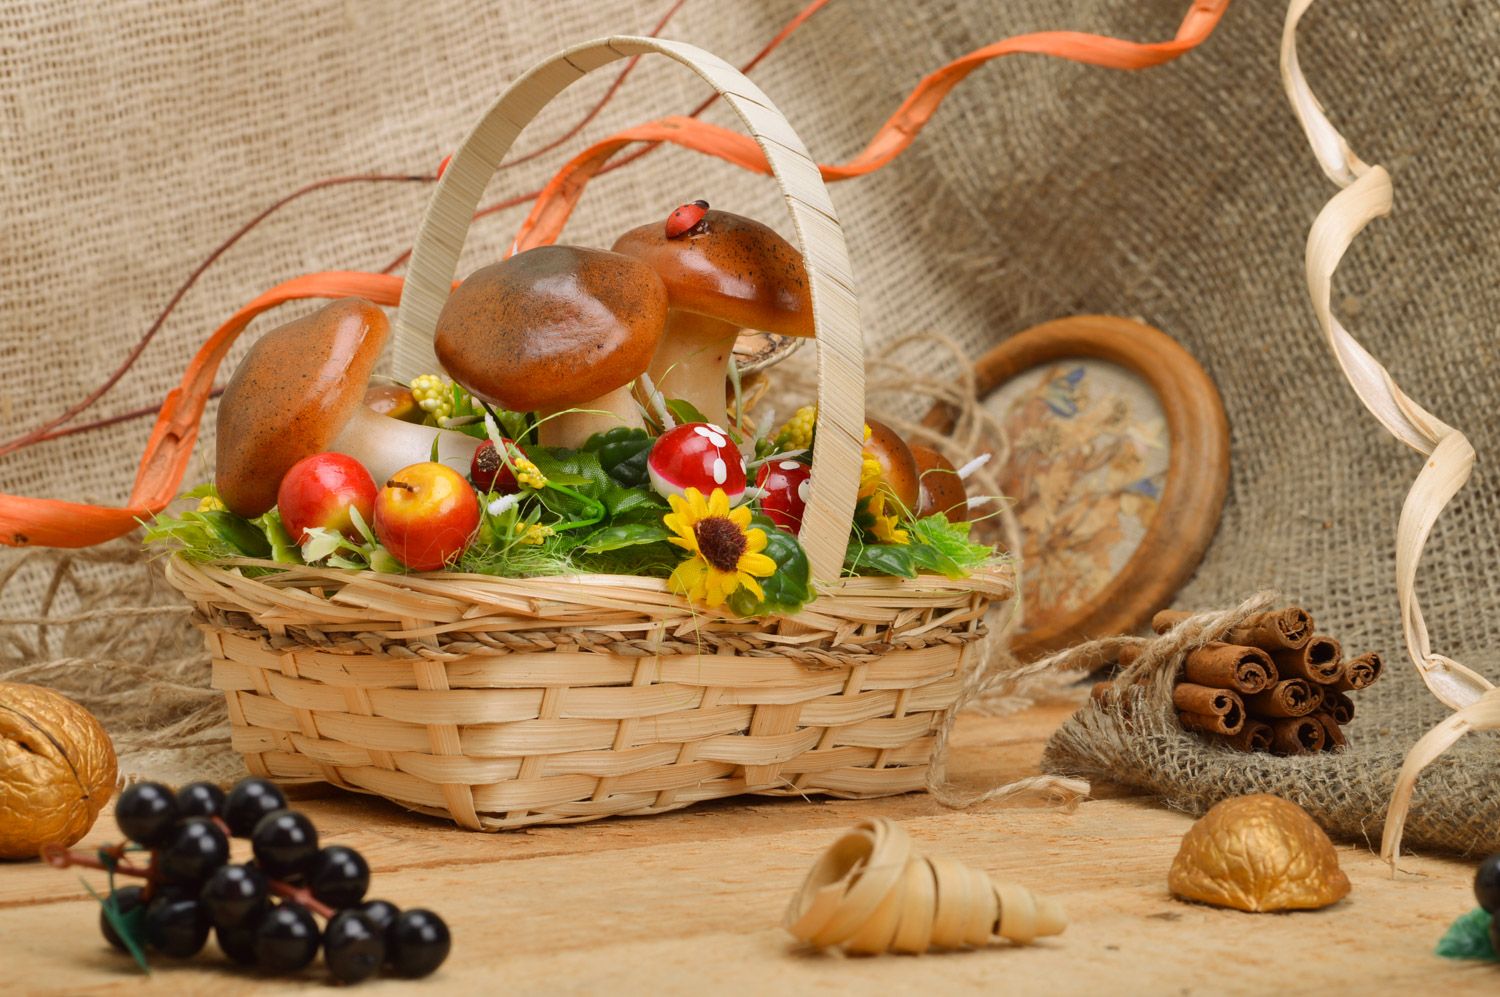 Handmade decorative sisal basket with fruit and mushrooms and frog figurine interior composition photo 1